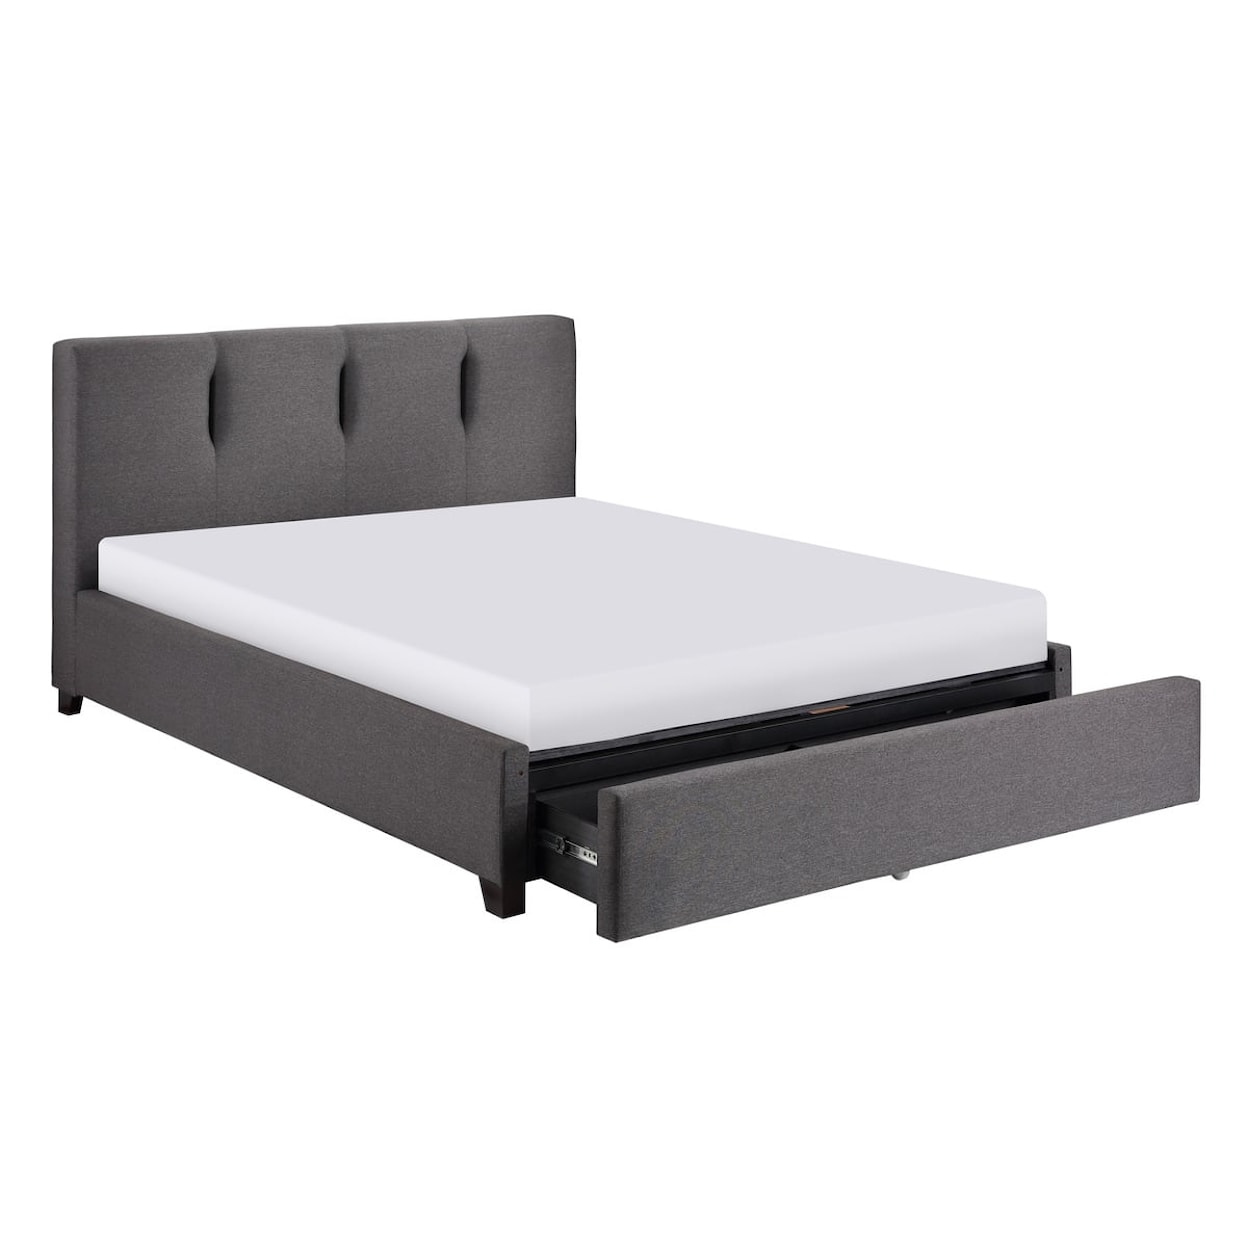 Homelegance Furniture Aitana Queen Bed with Footboard Storage